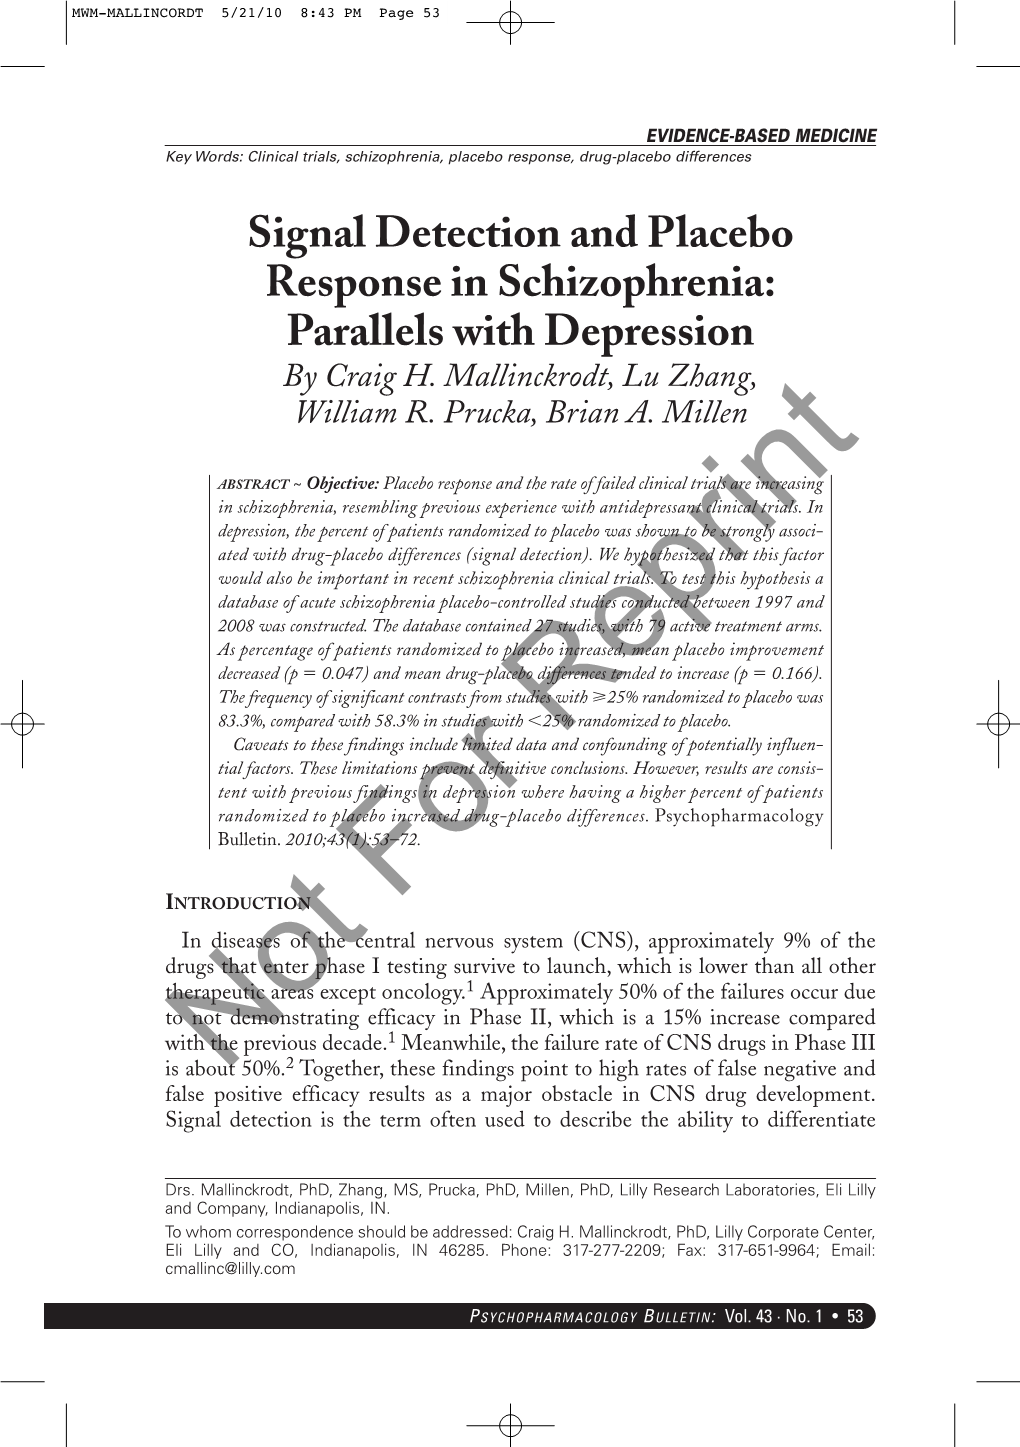 Signal Detection and Placebo Response in Schizophrenia: Parallels with Depression by Craig H